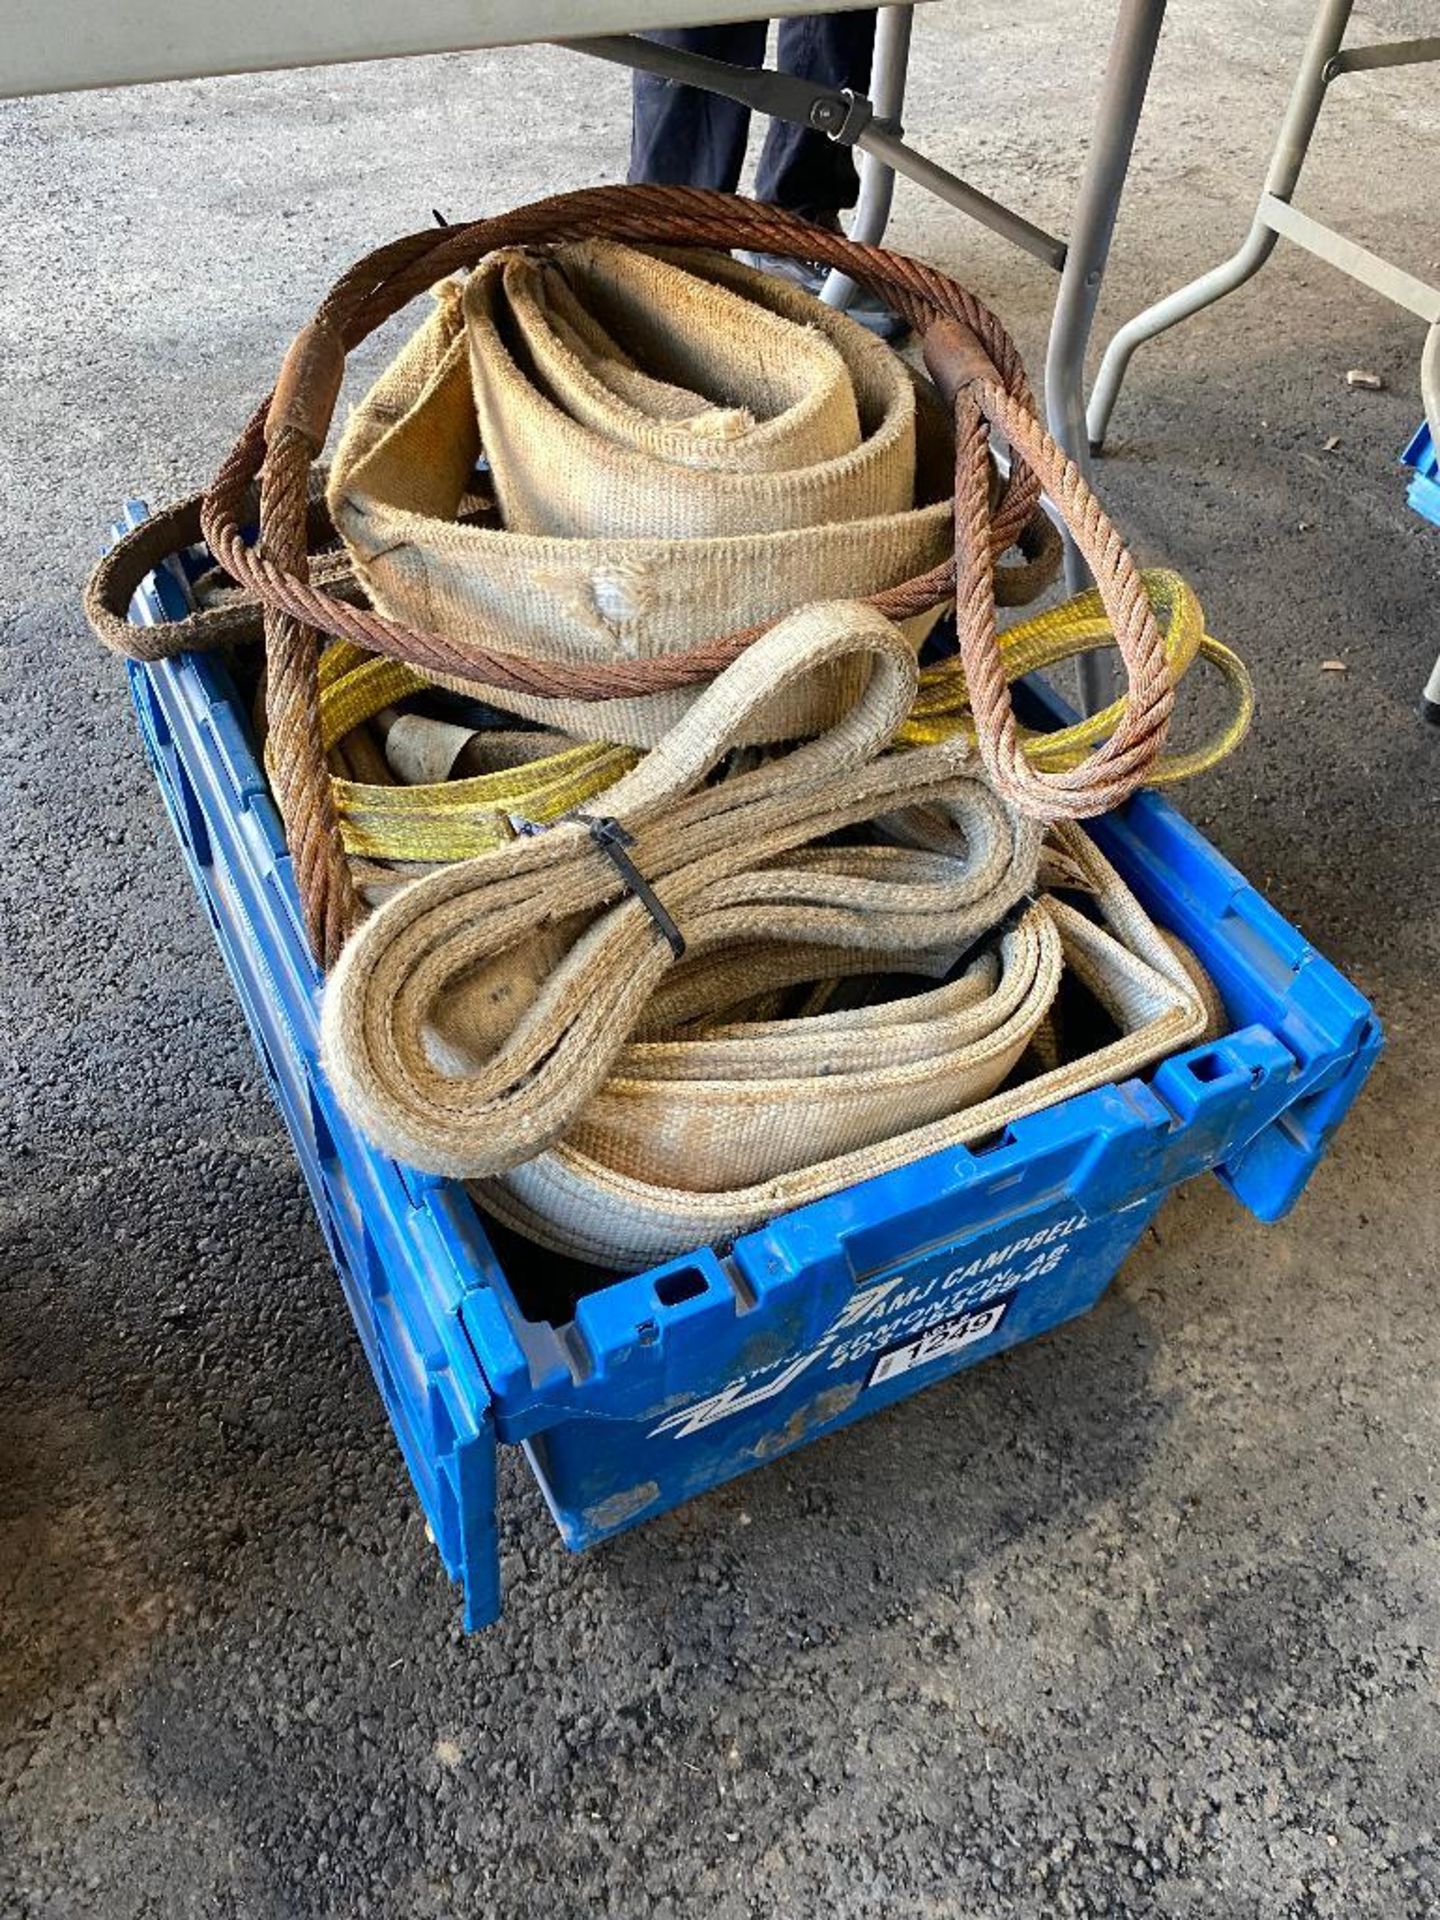 Tote of Asst. Lifting Slings and Tow Straps, etc.